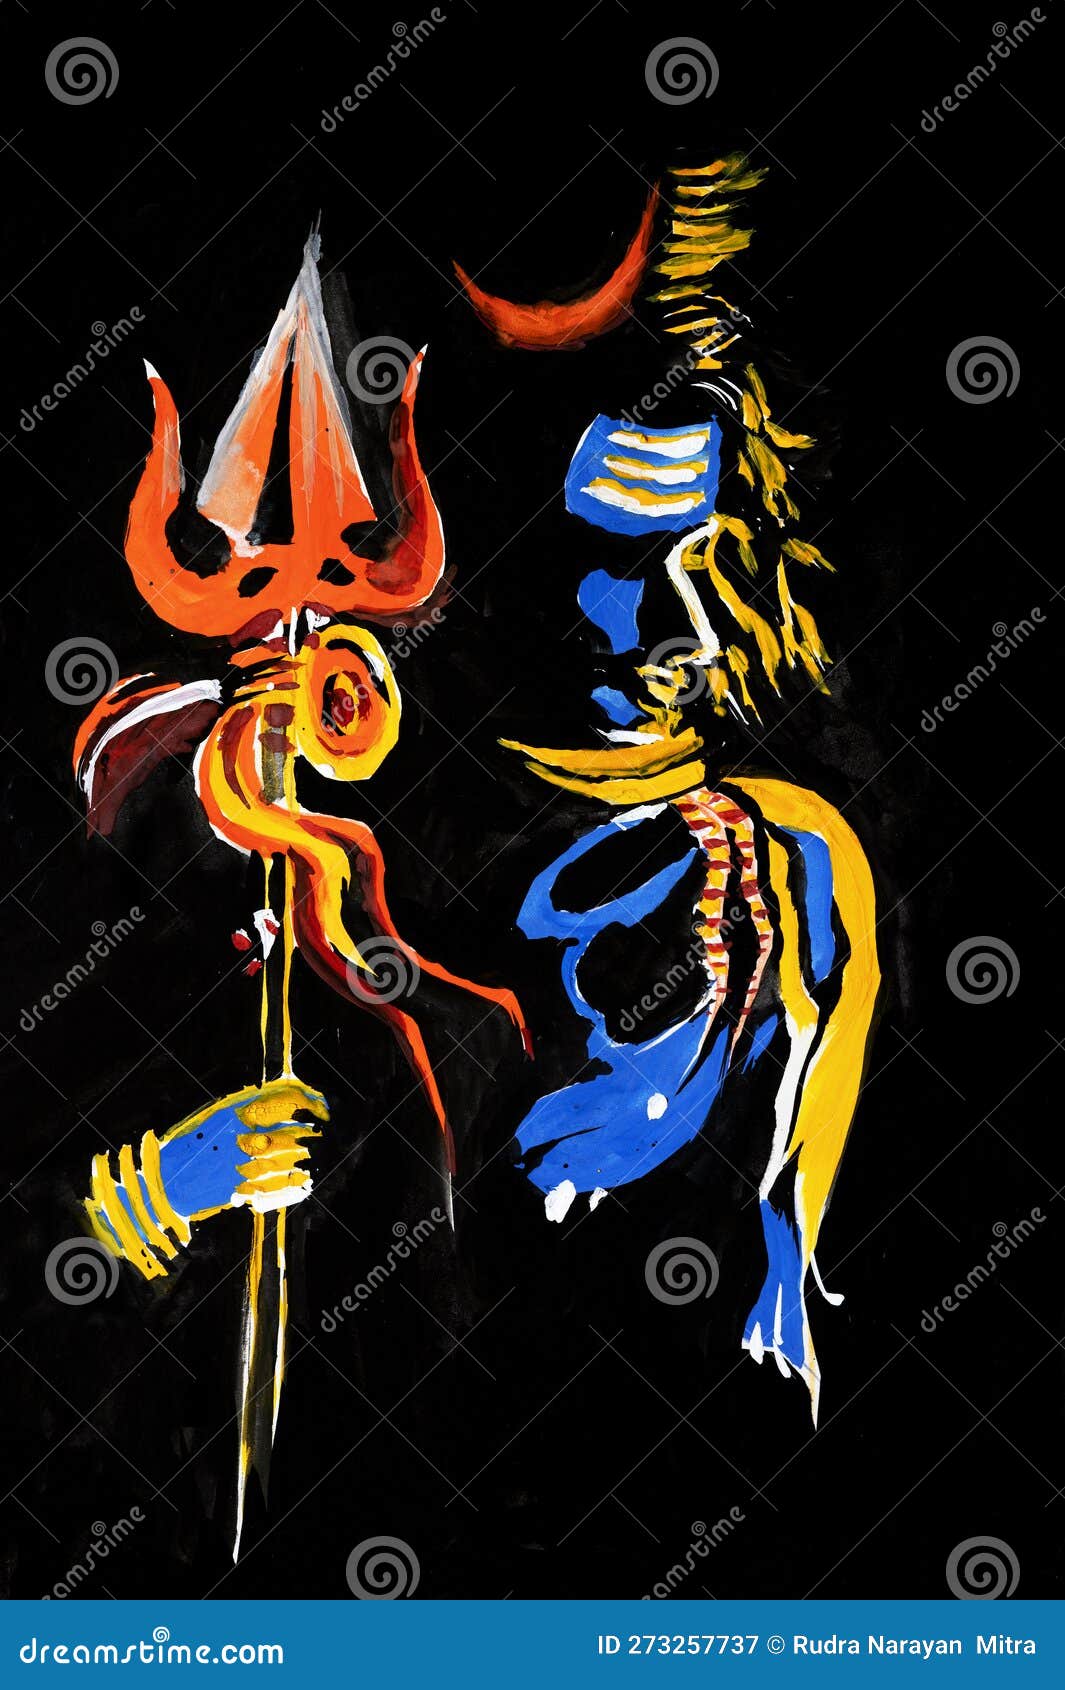 Bright Poster Color Made Hand Painted Illustration of Lord Shiva ...